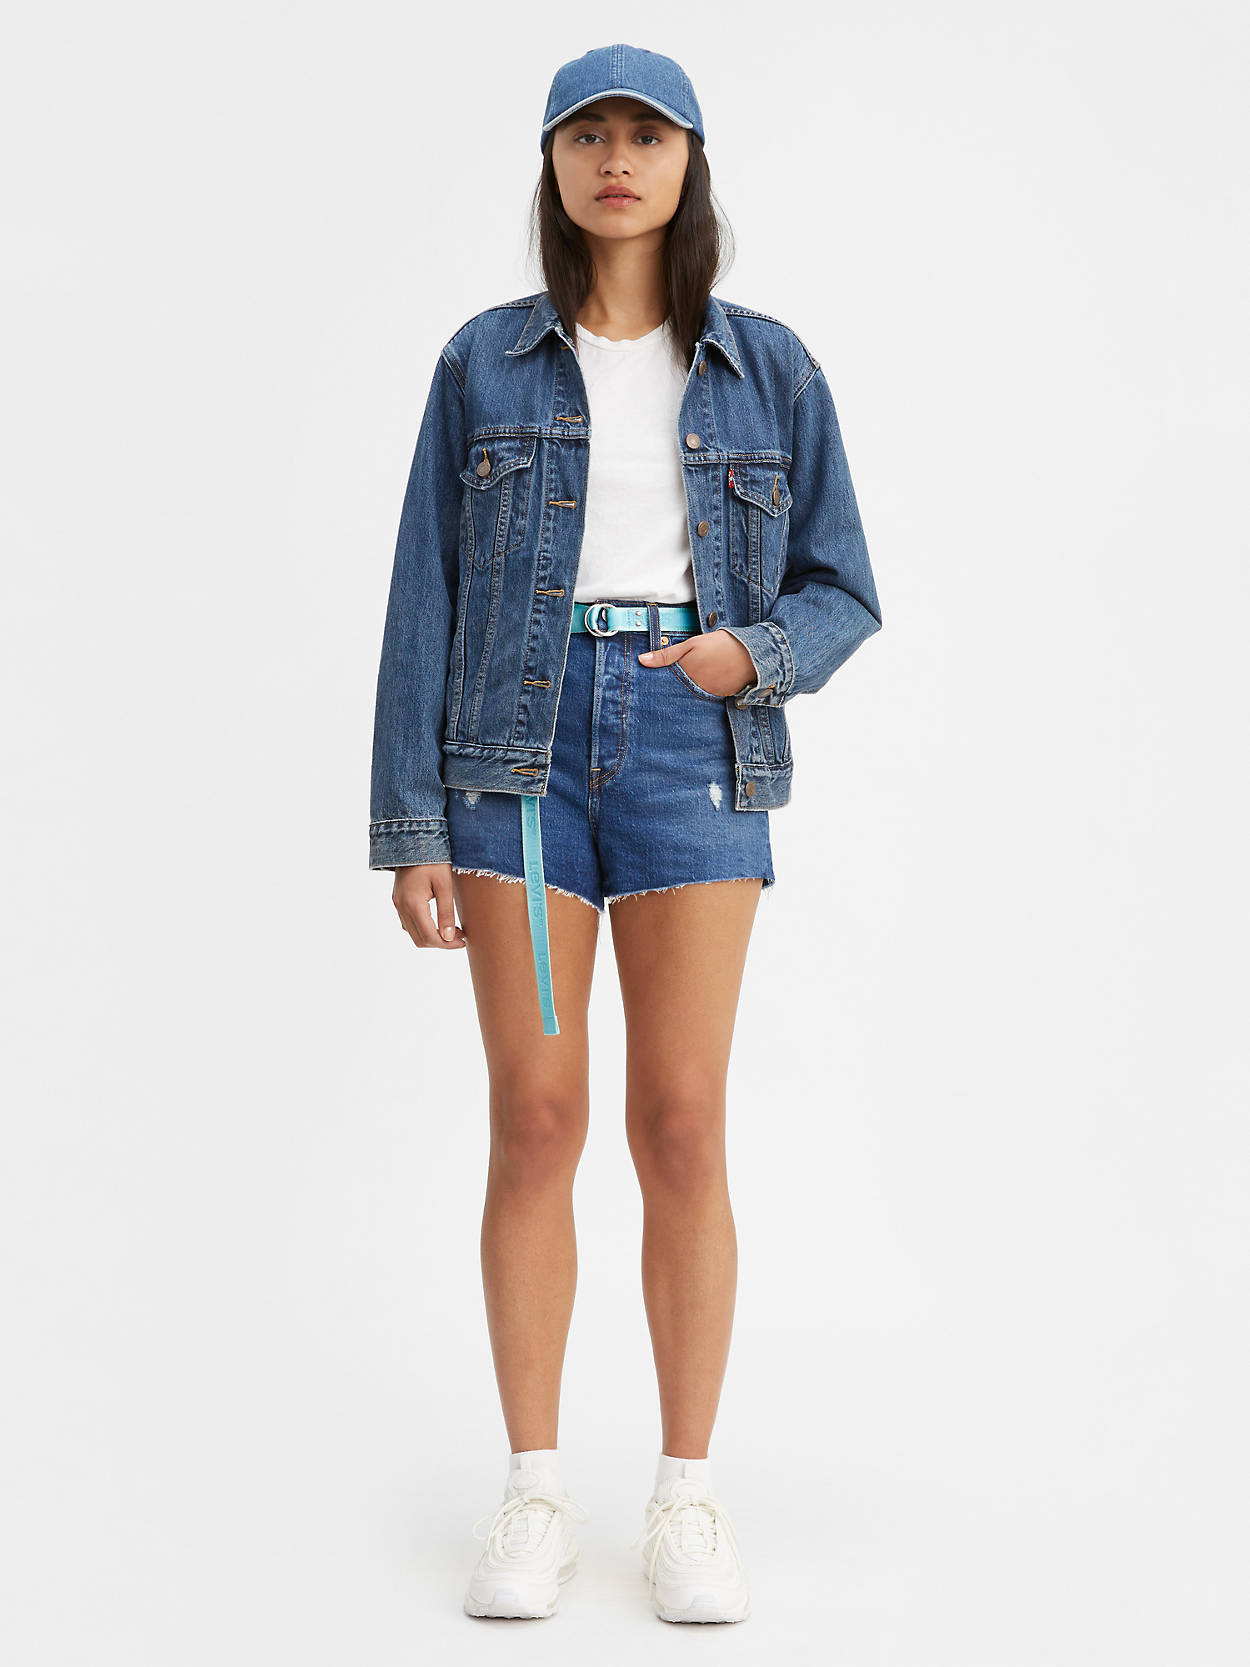 Levi’s: 40% Off Sitewide + Free Shipping